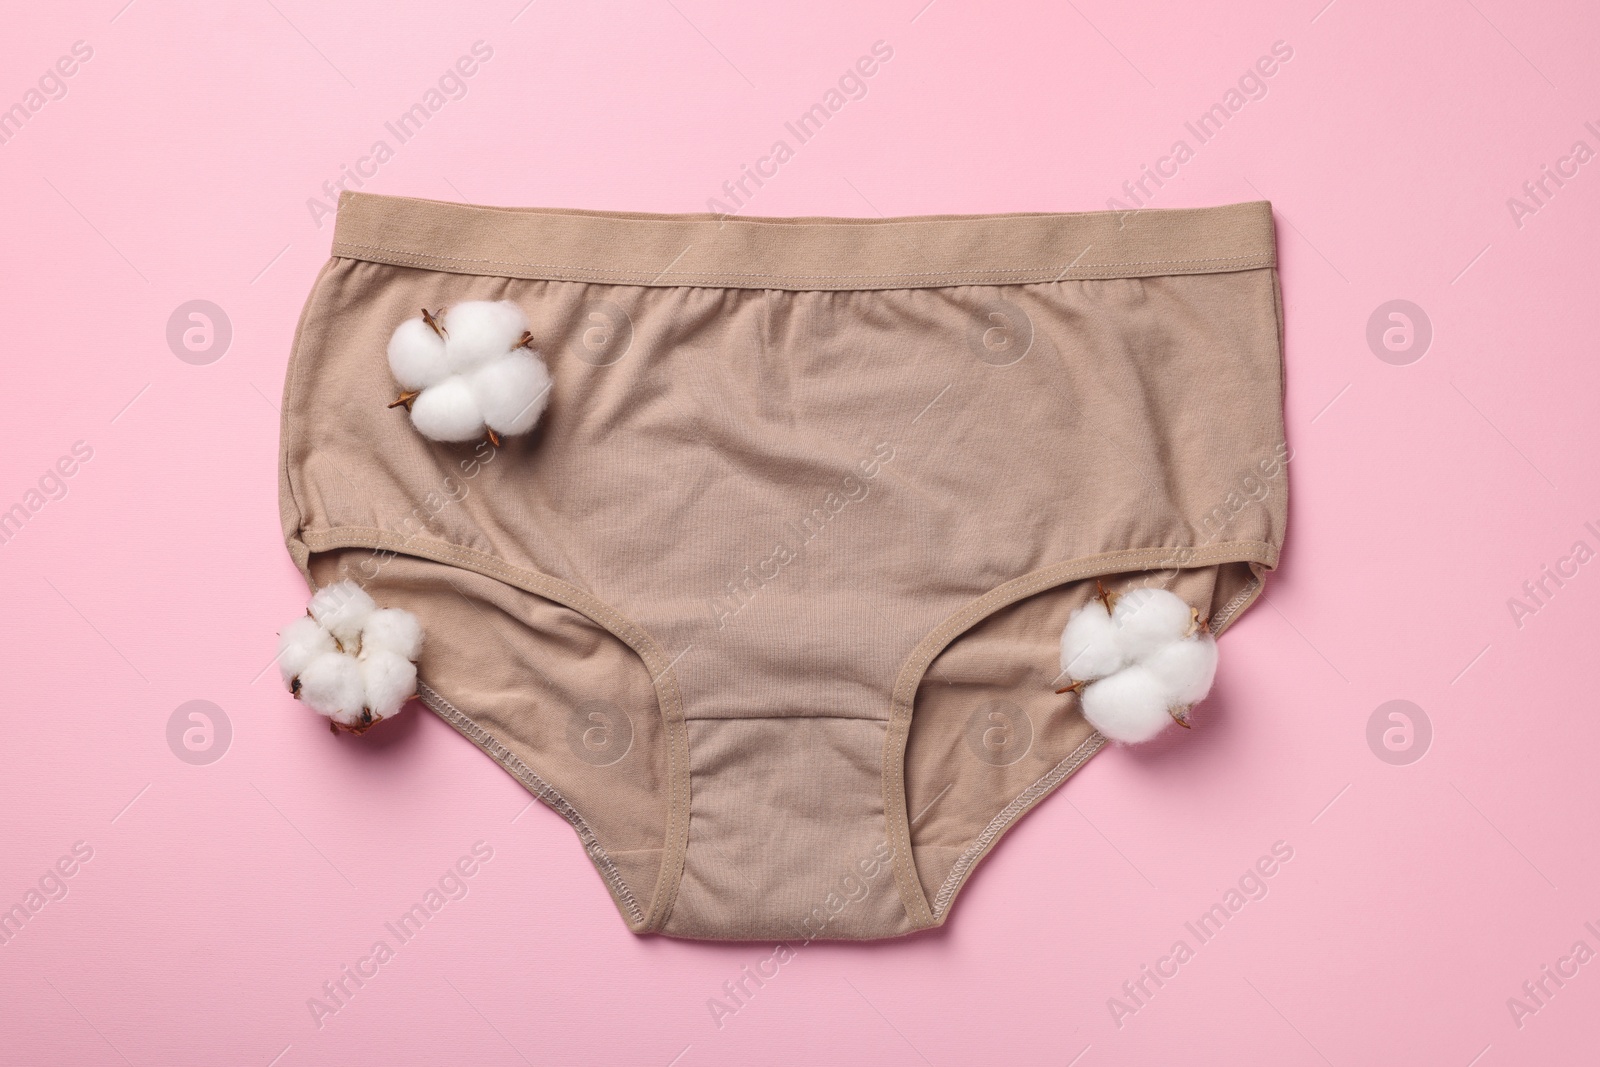 Photo of Beige women's underwear and cotton flowers on pink background, flat lay